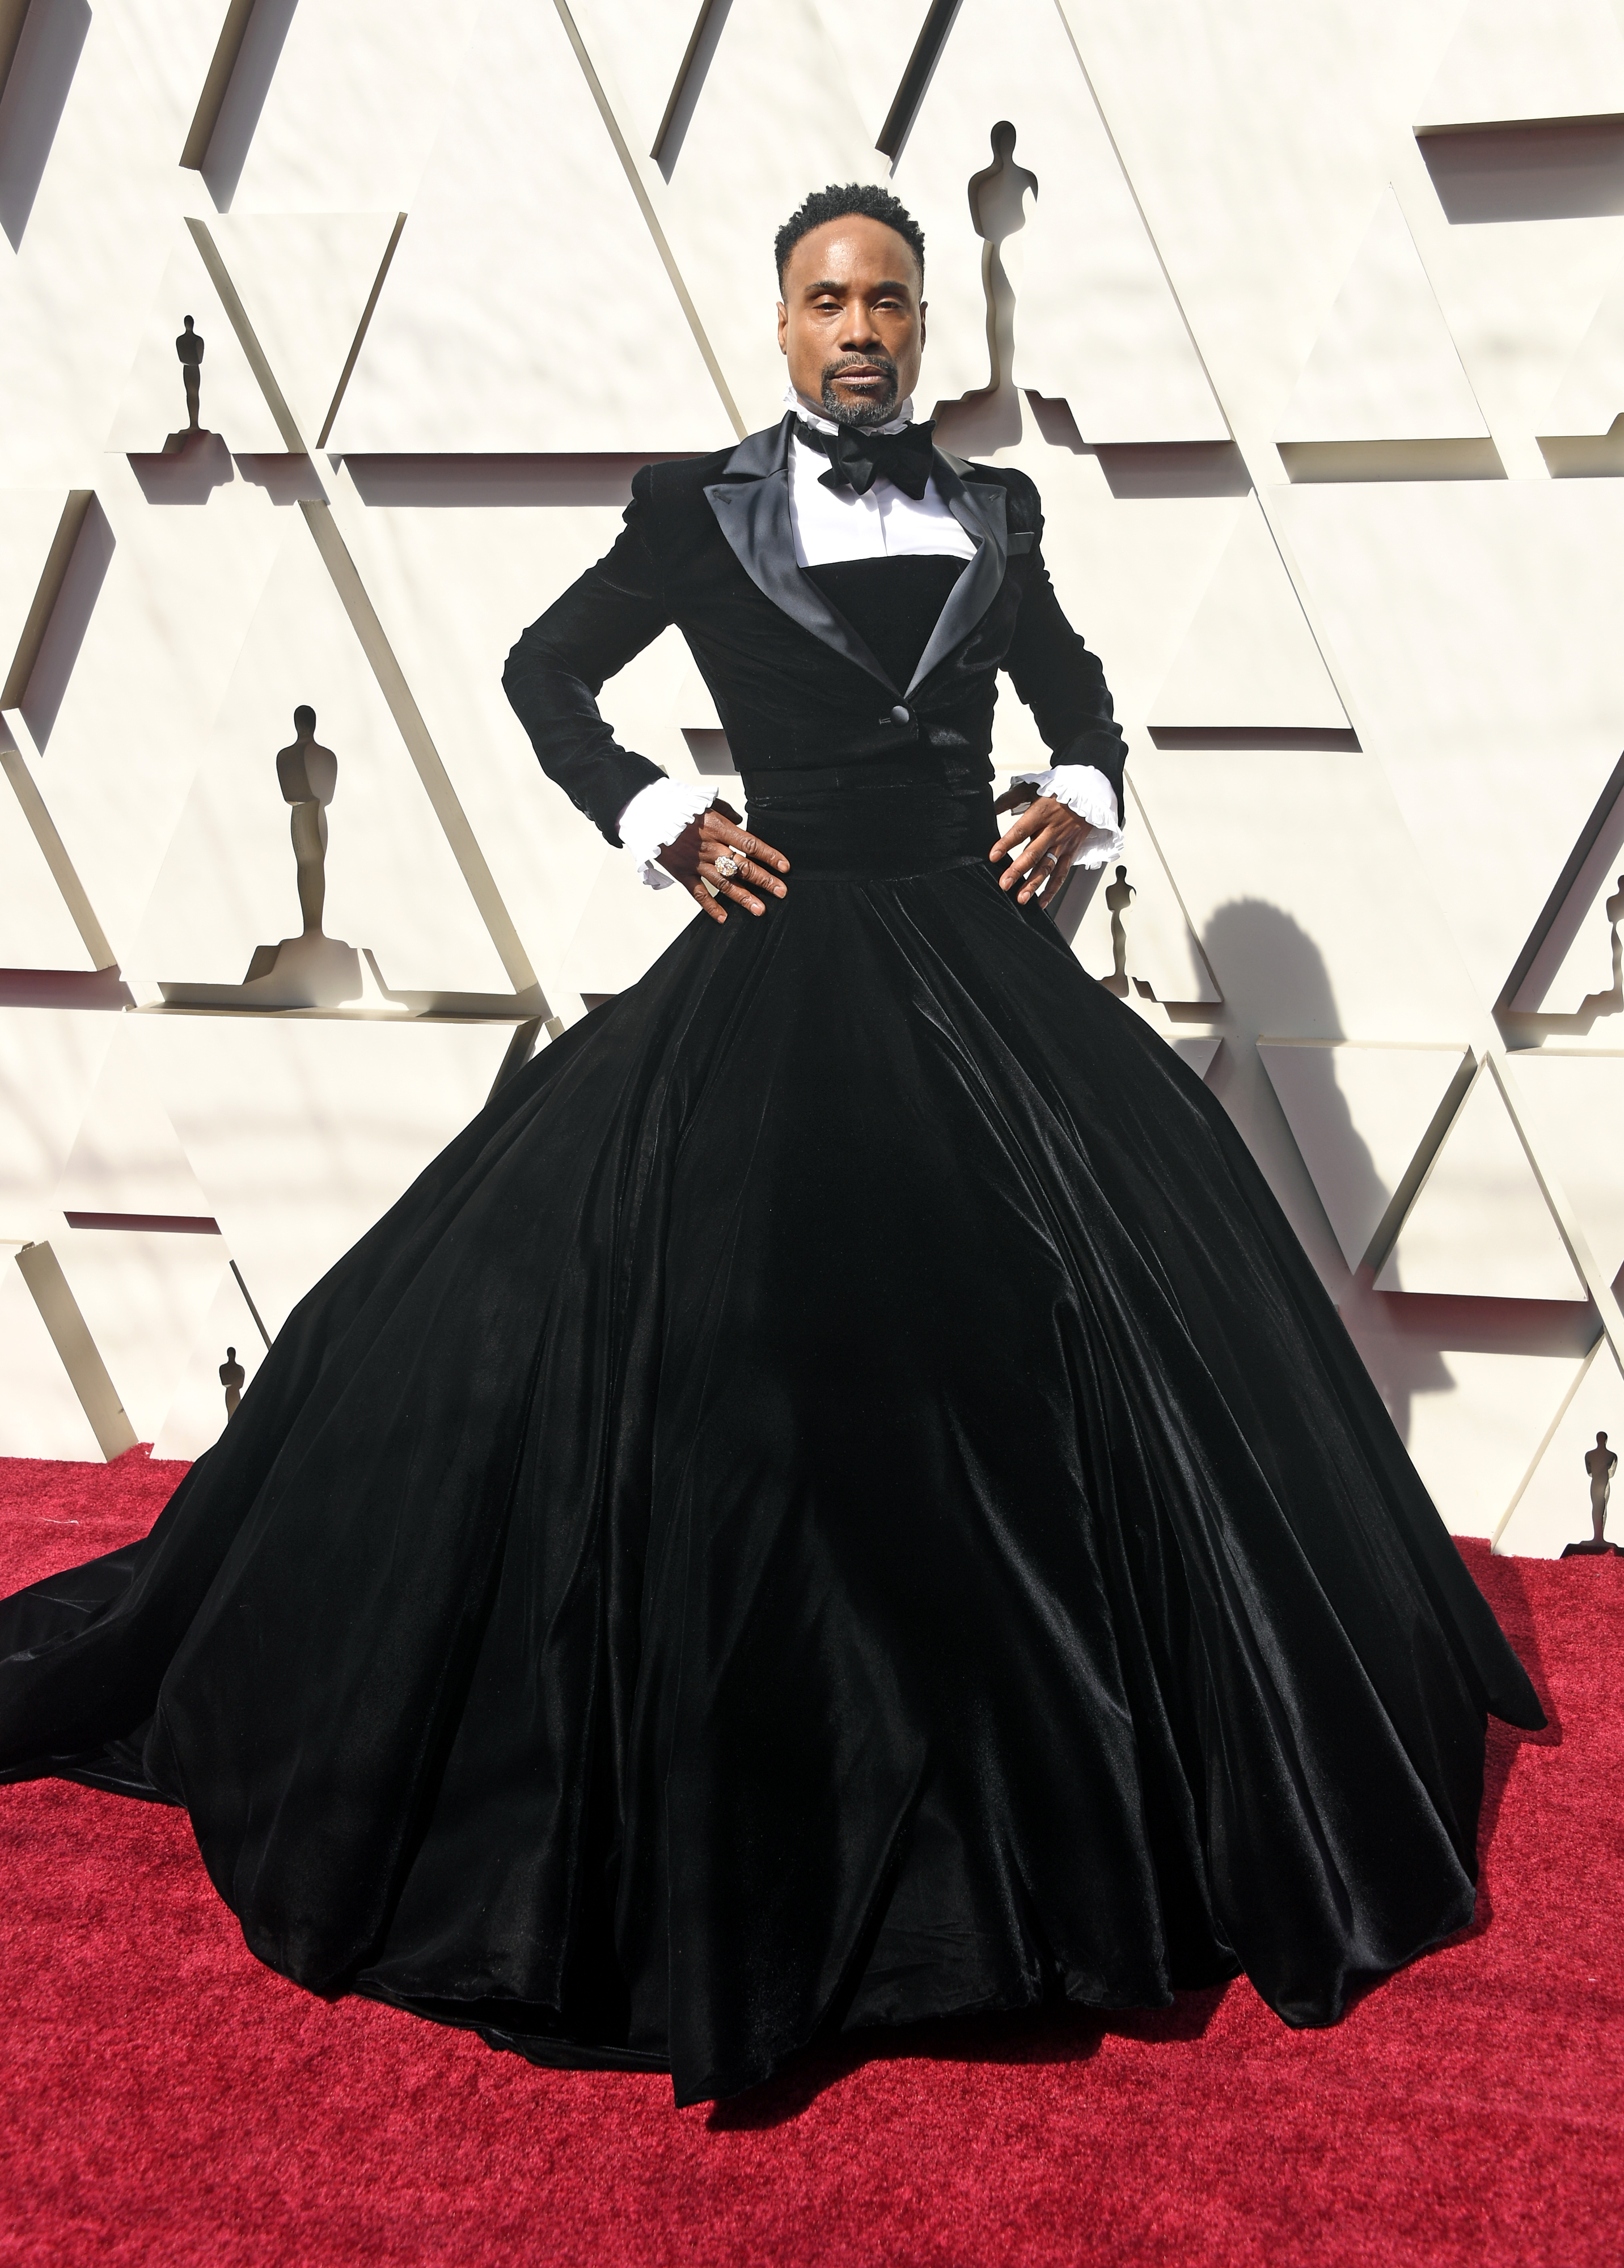 Billy Porter in Christian Siriano
(Photo by Frazer Harrison/Getty Images)